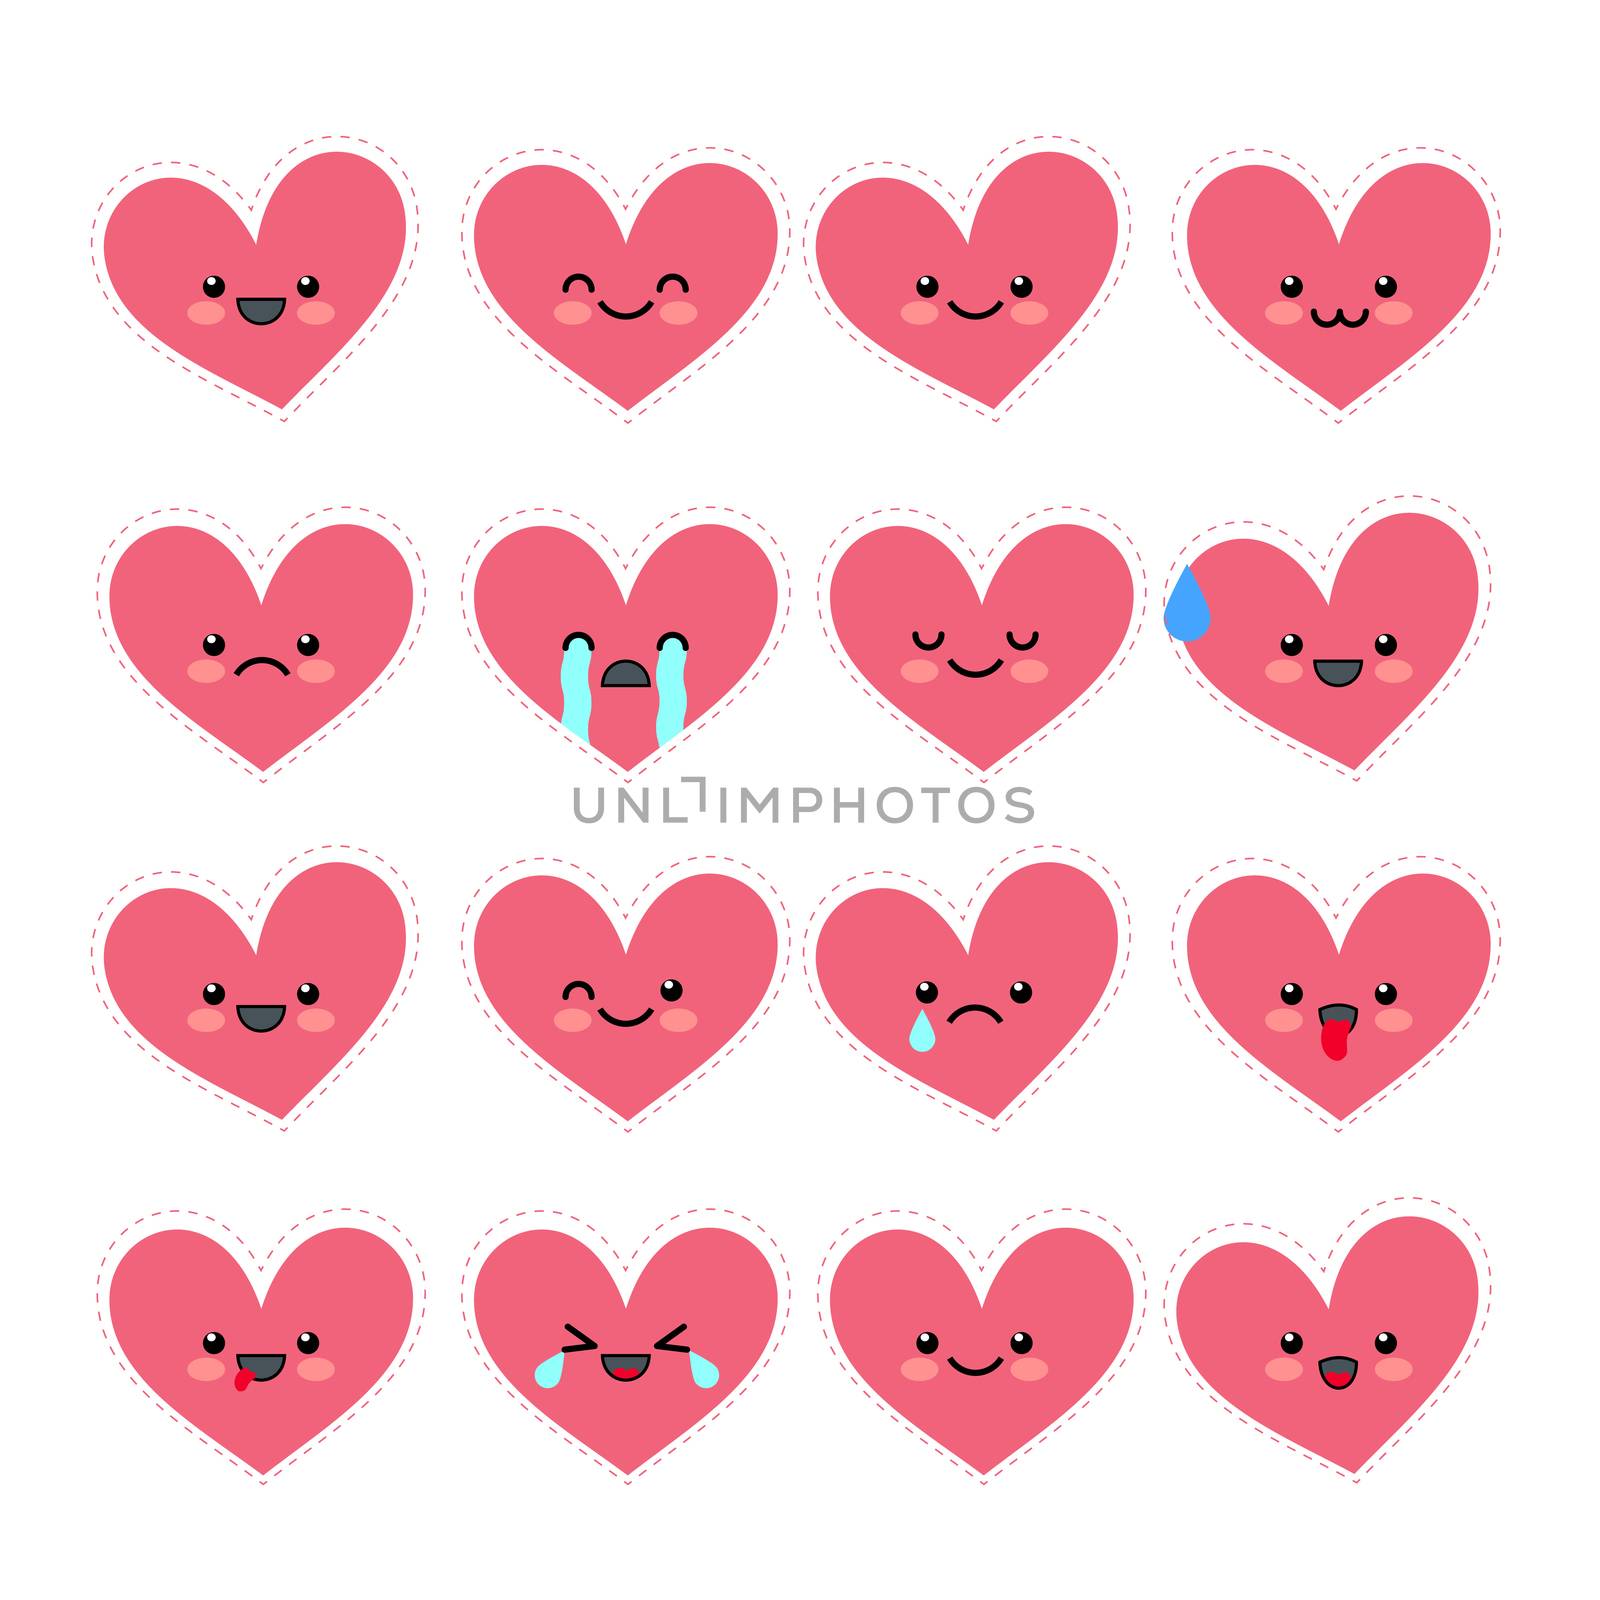 Cute heart emoticons set. Various emotions of the character. Emotions collections of Valentine s day avatar icons.